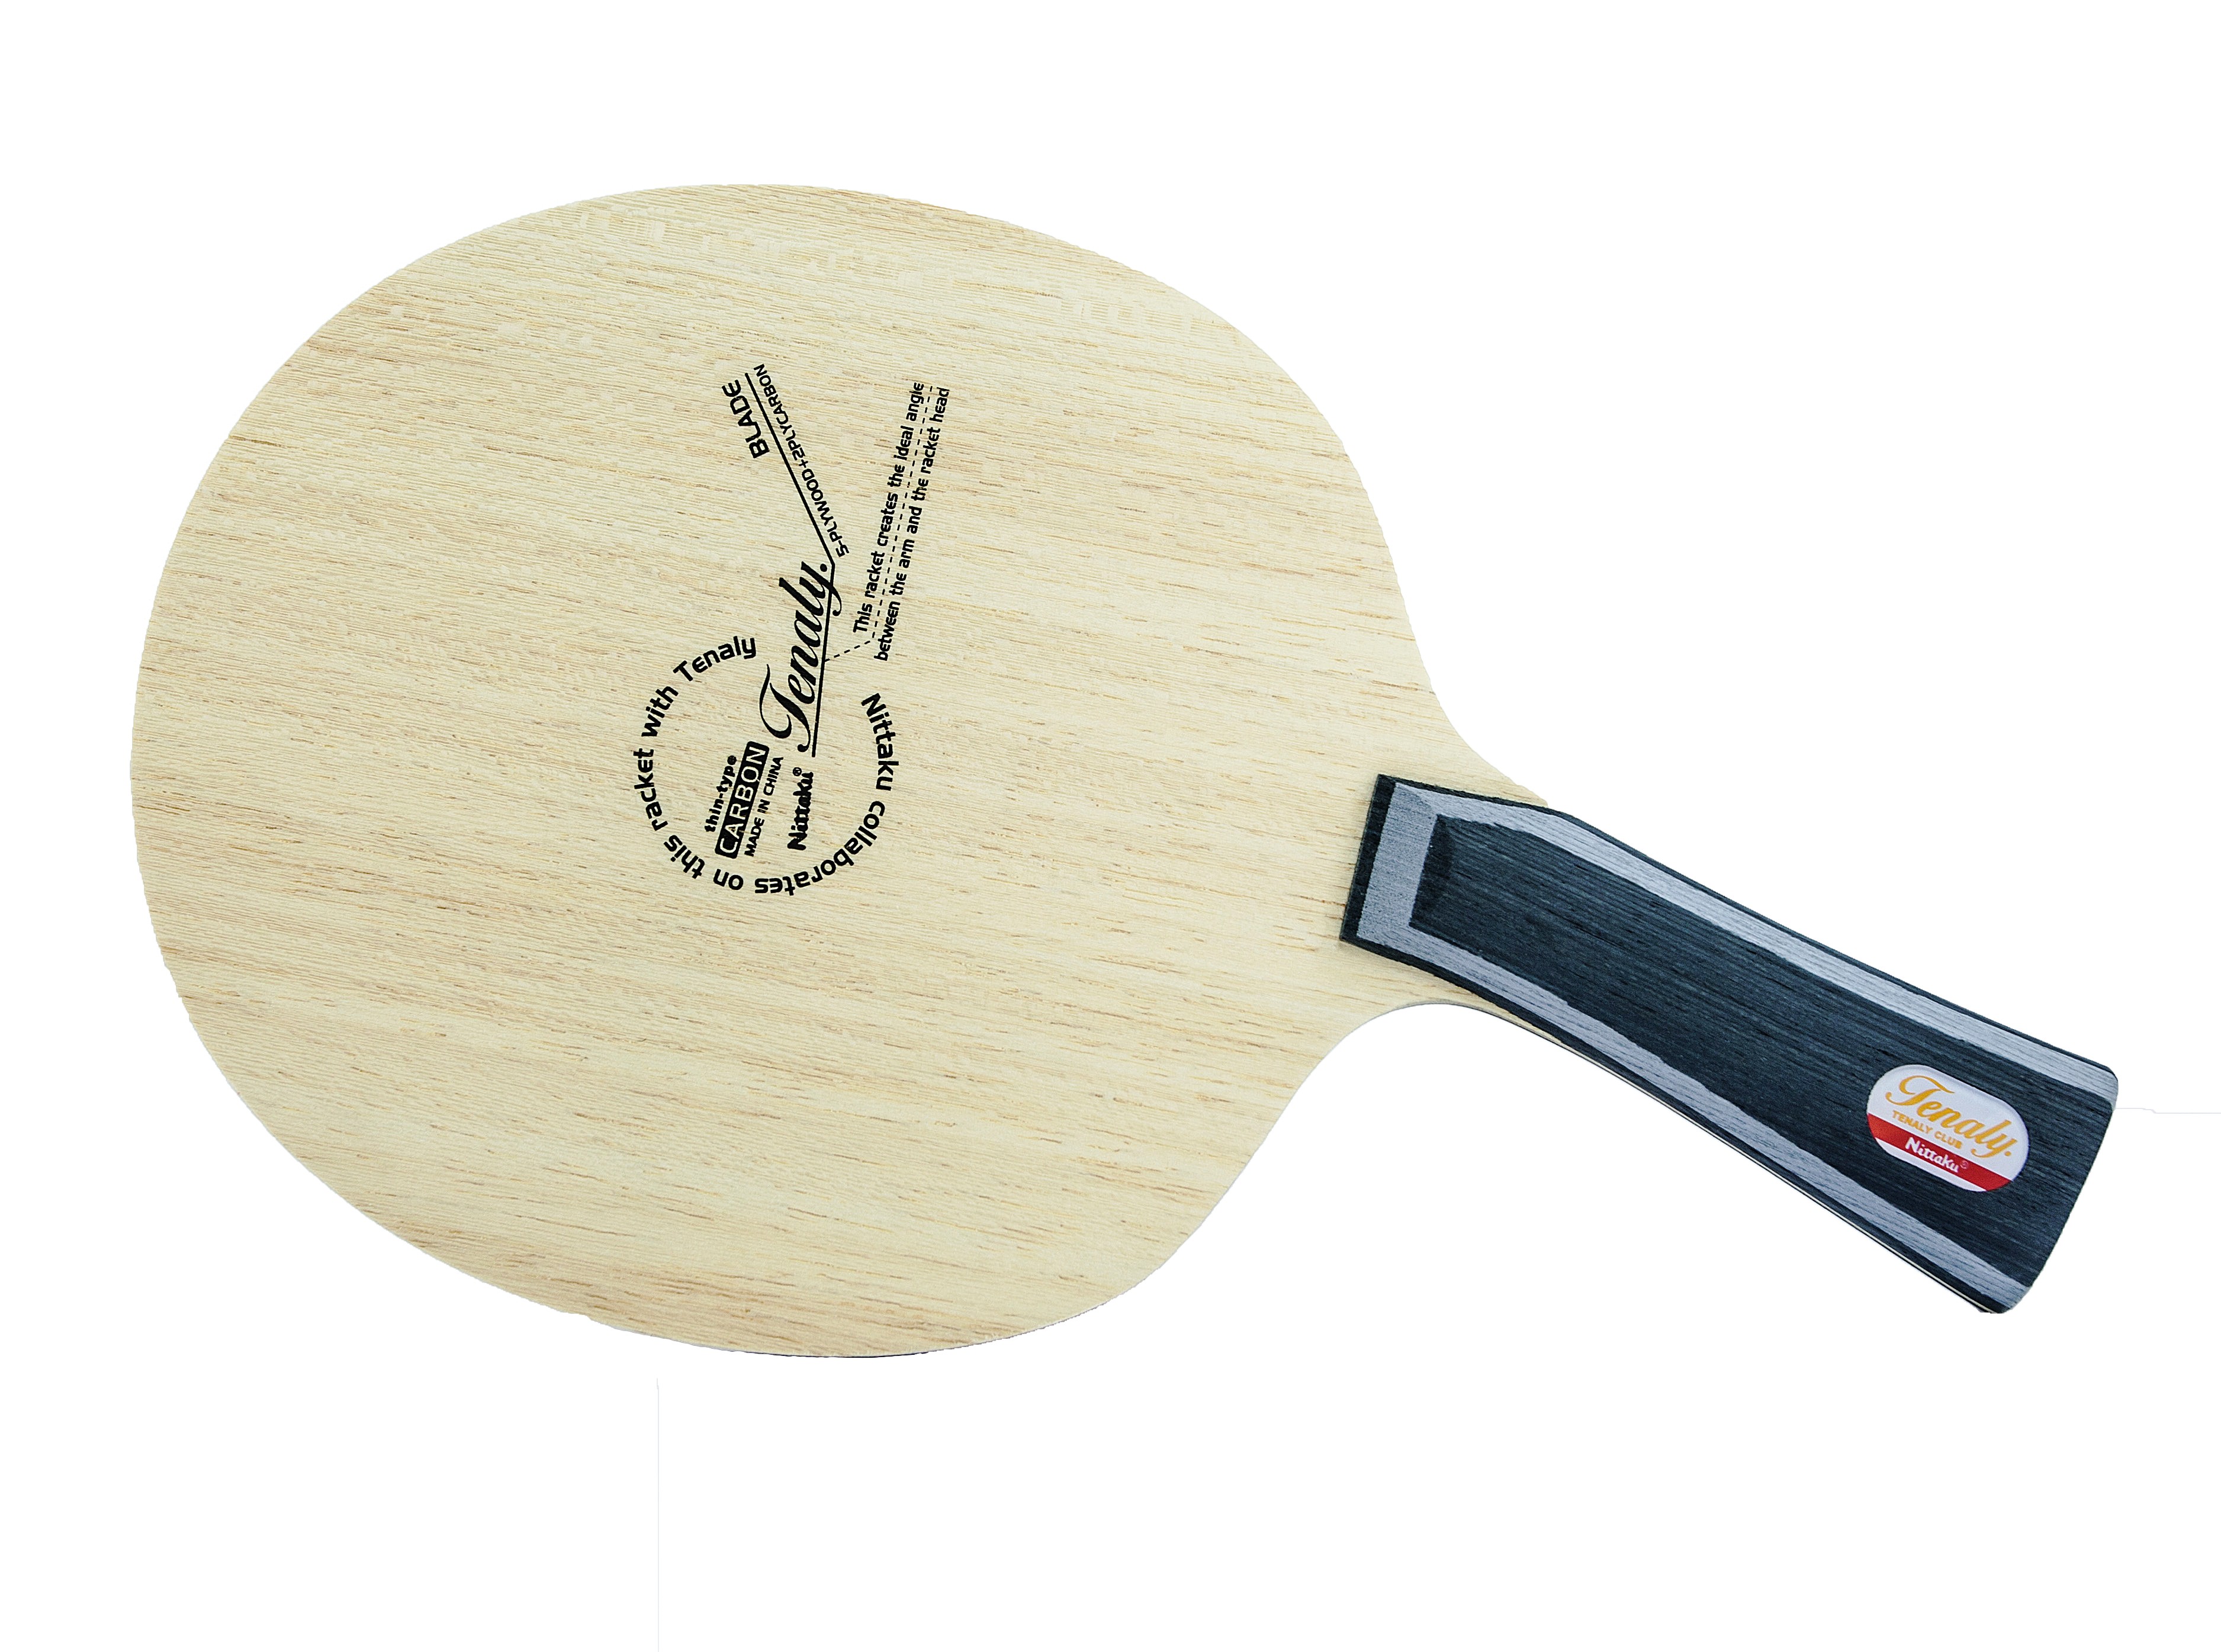 Details about   Nittaku Tenaly Carbon Table Tennis Ping Pong Racket Paddle  Made in Japan 